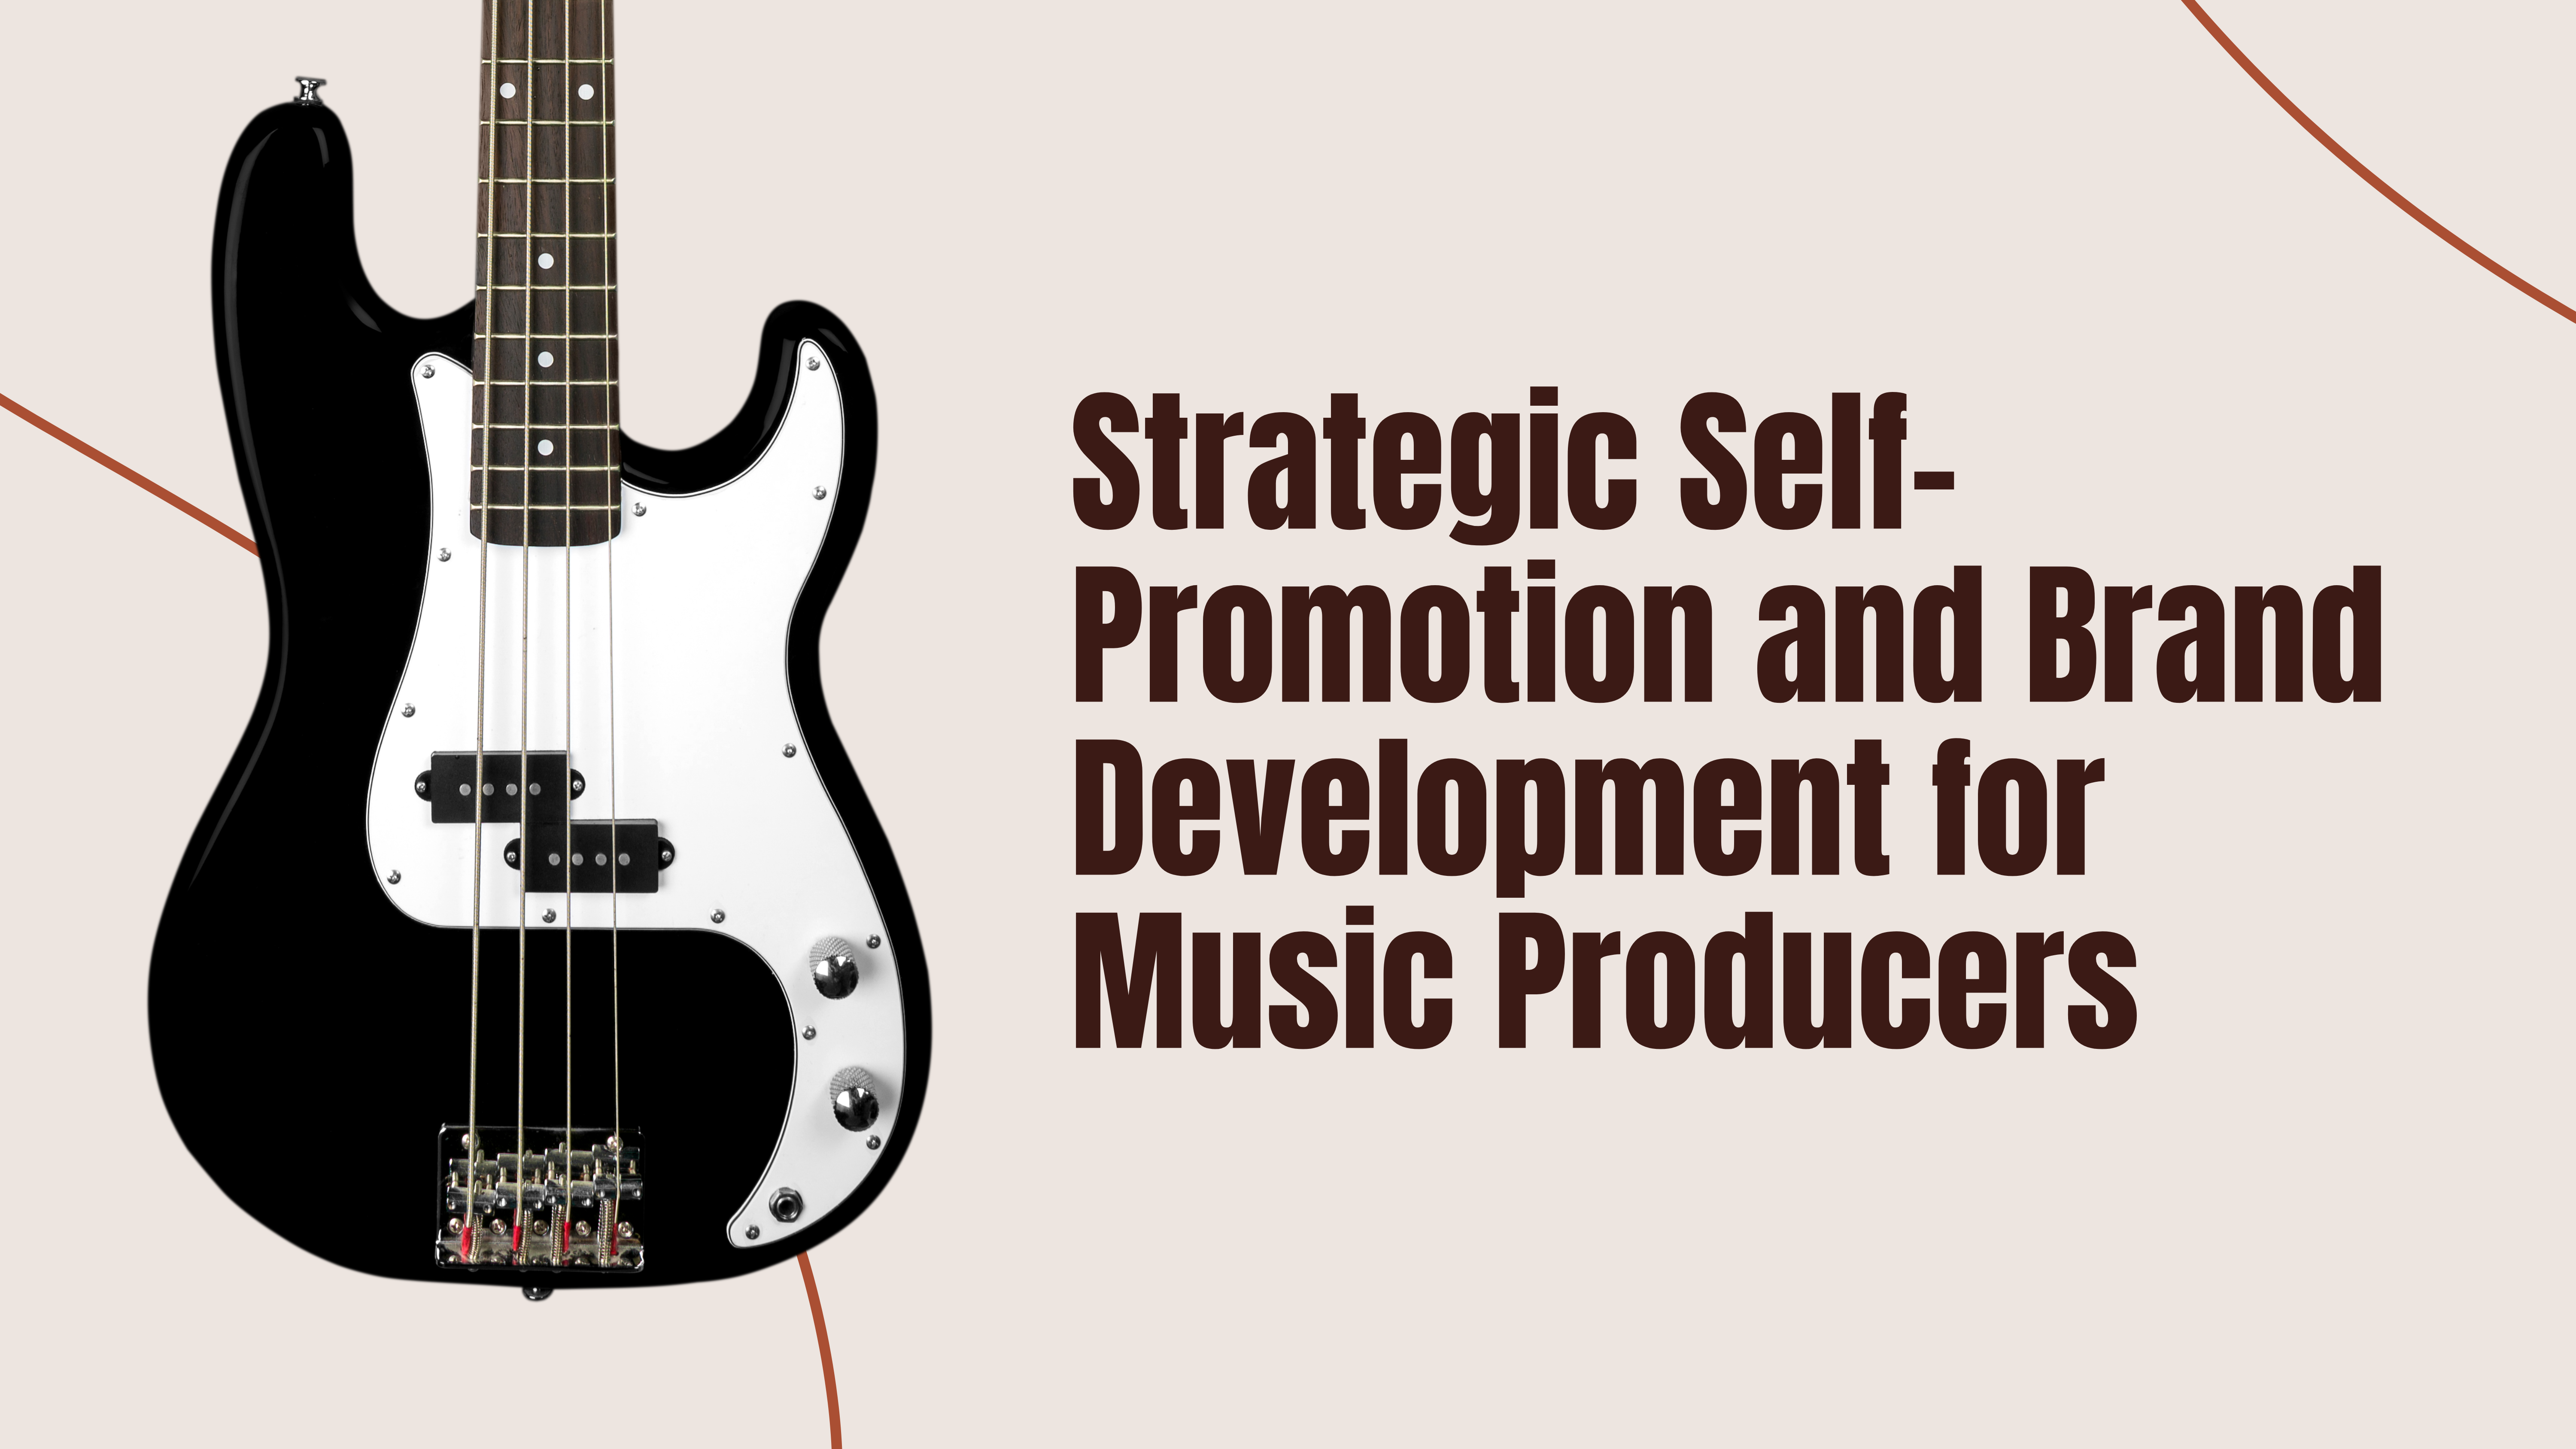 Strategic Self-Promotion and Brand Development for Music Producers